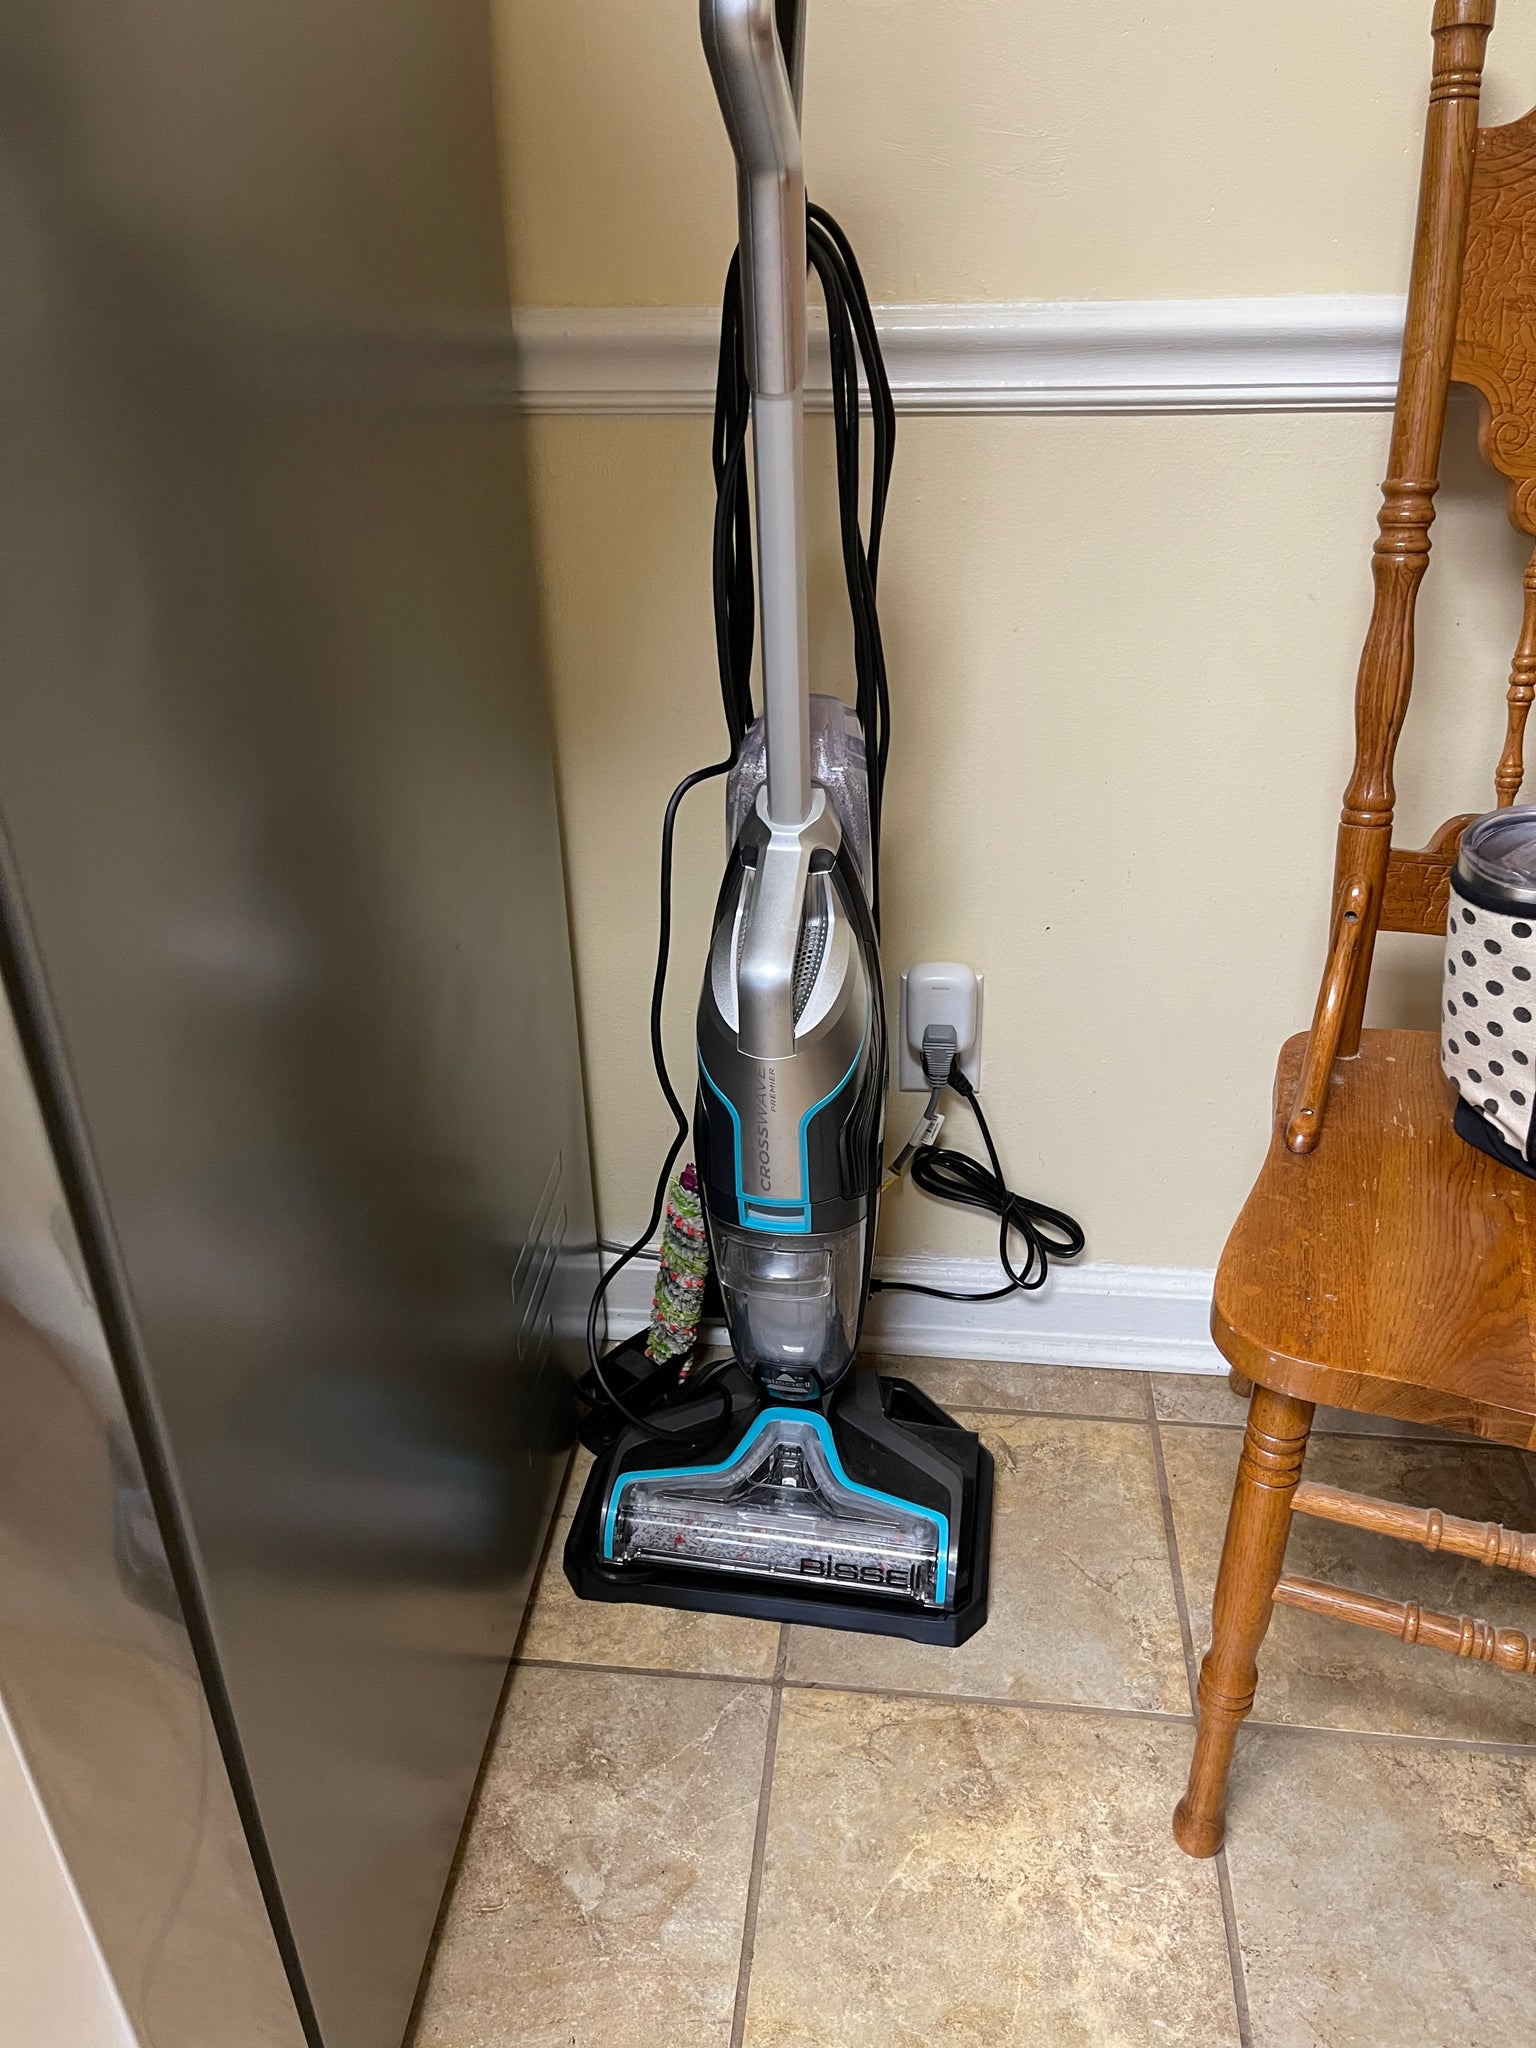 Bissell Cross Wave Multi-Surface Cleaner, All-In-One